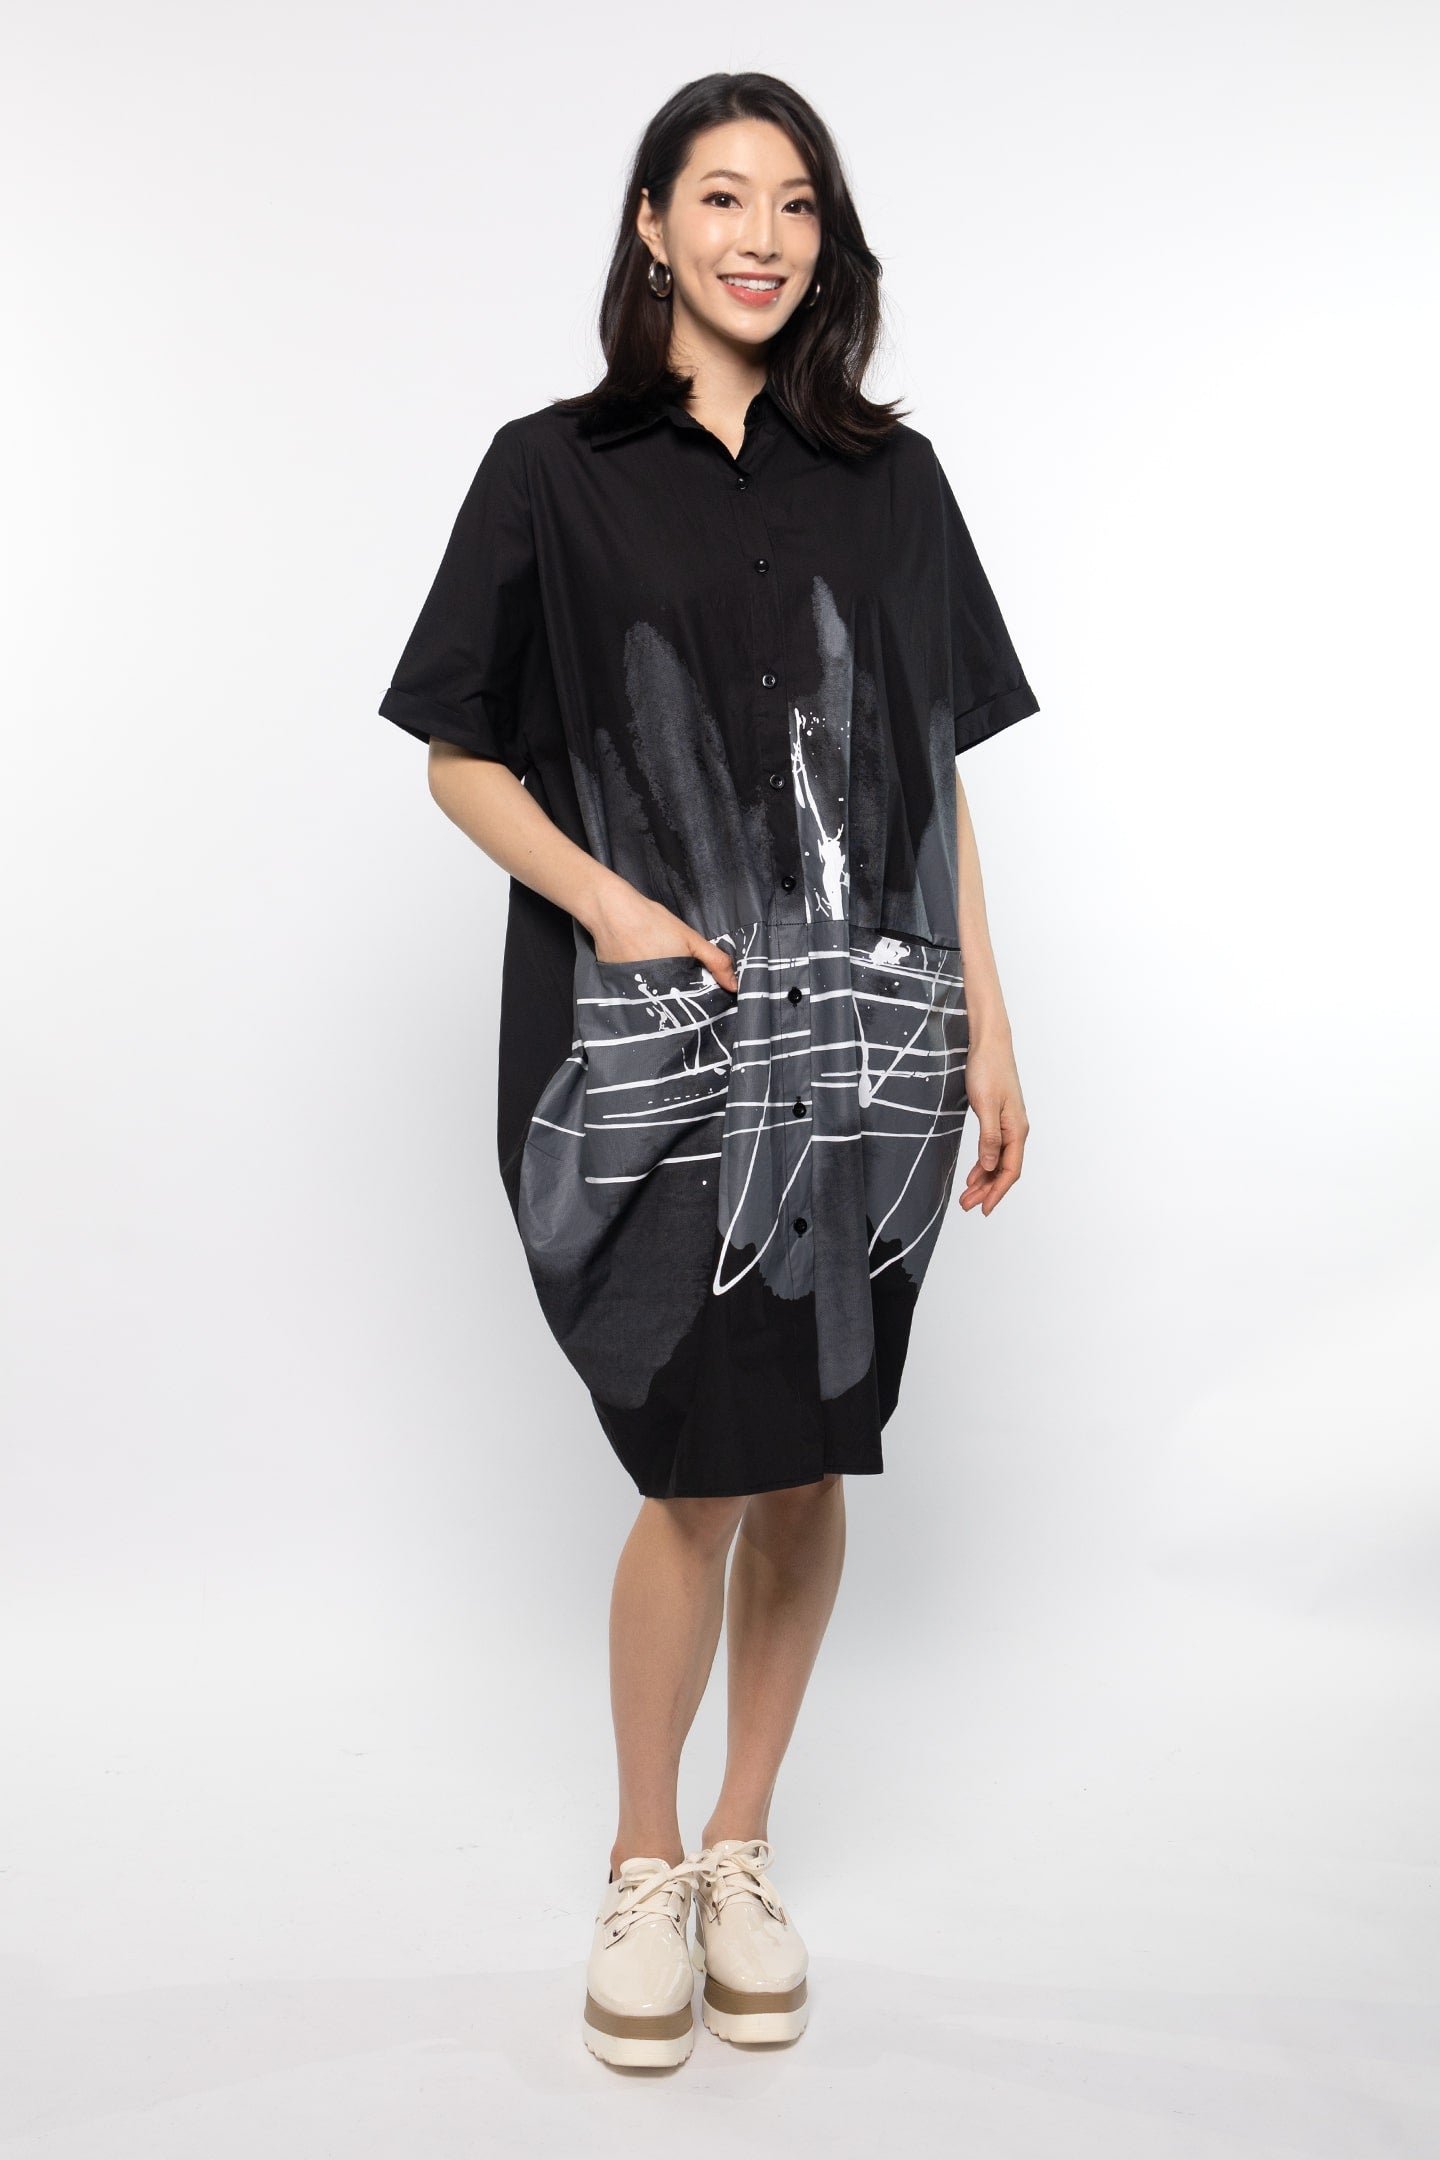 Backorders Isador Dress in Abstract